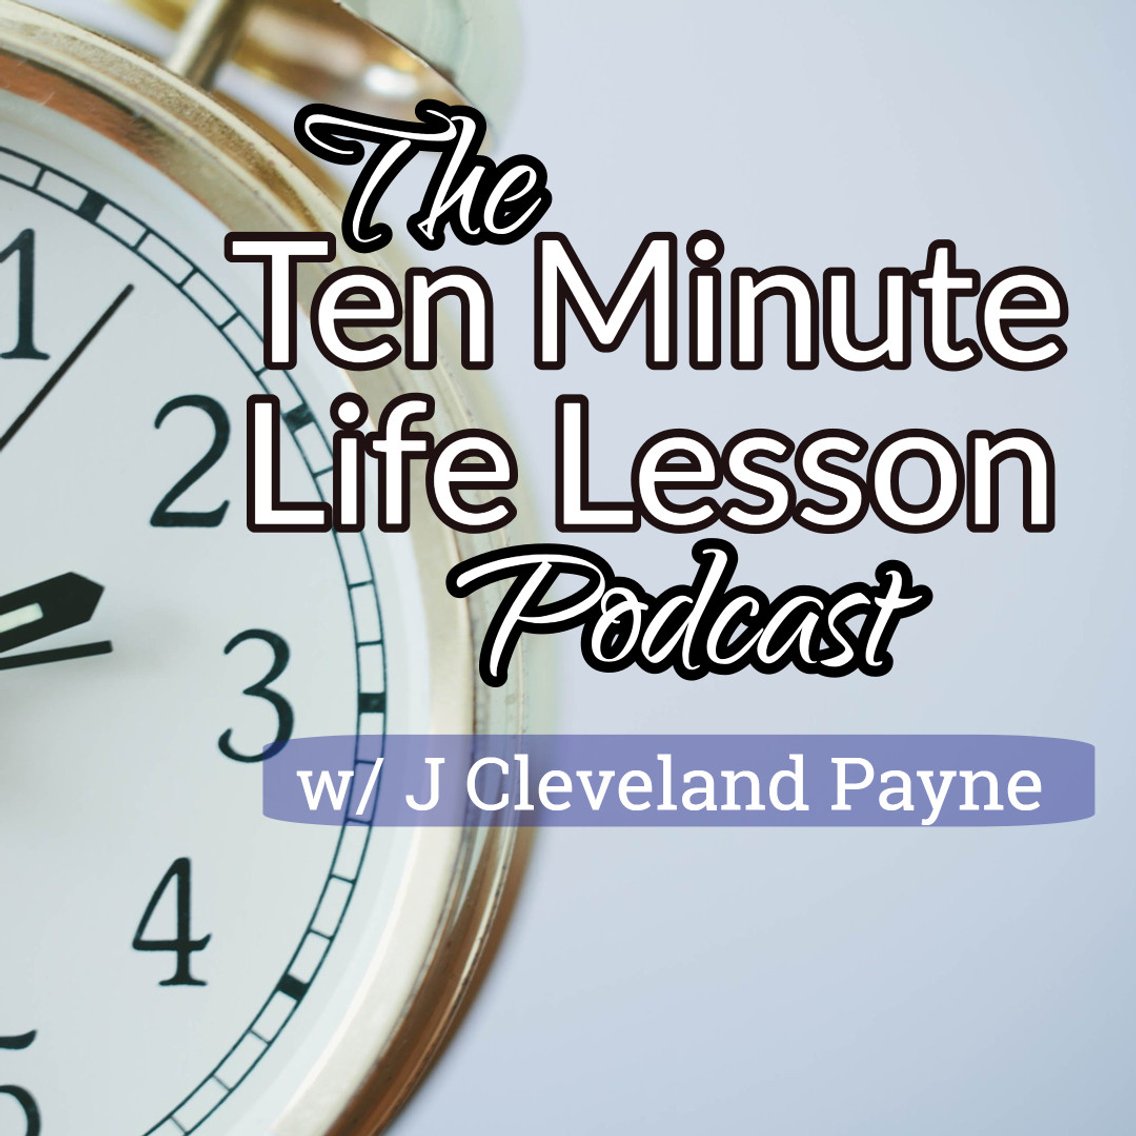 The Ten Minute Life Lesson Podcast - Cover Image